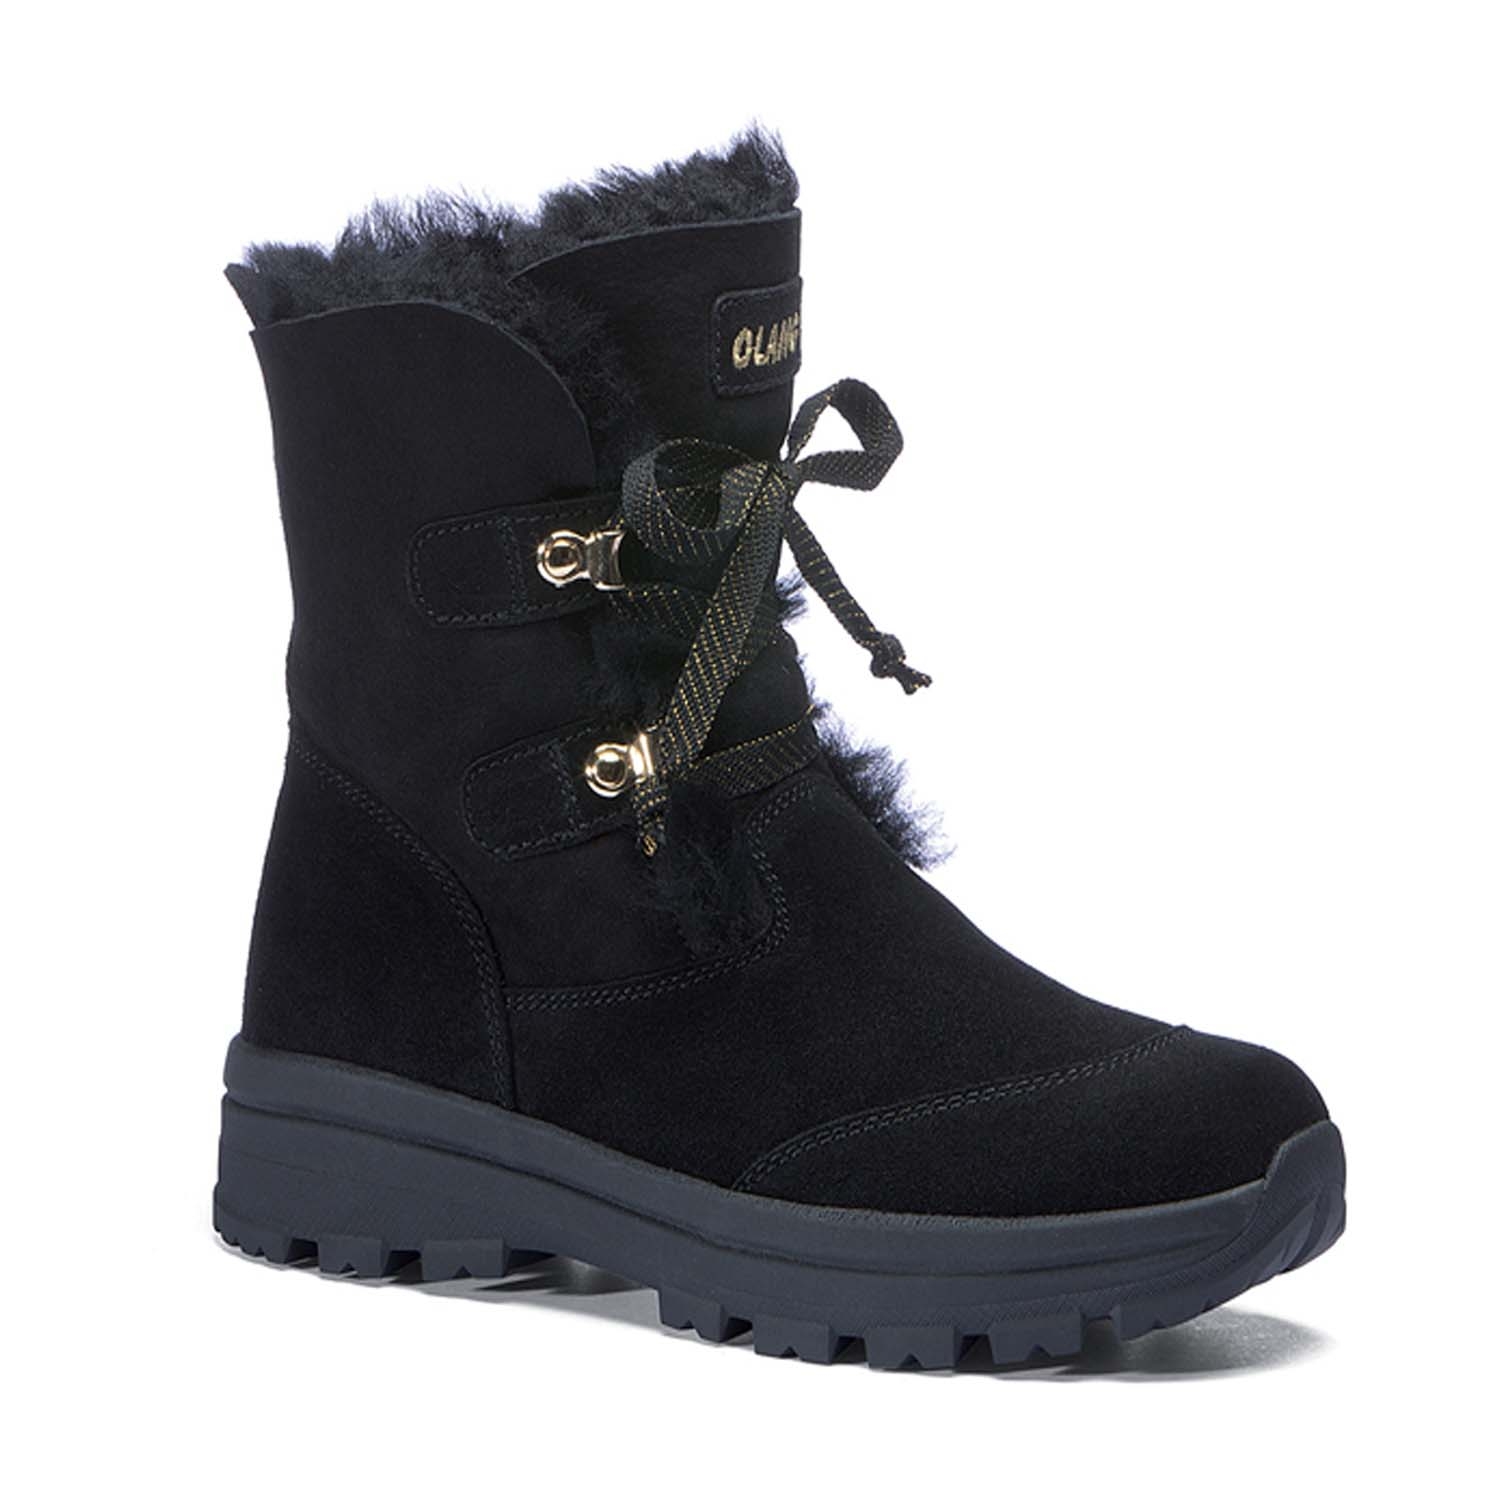 olang Lappone Boot Black 2020 | Olang | Snow Boots | Snowtrax